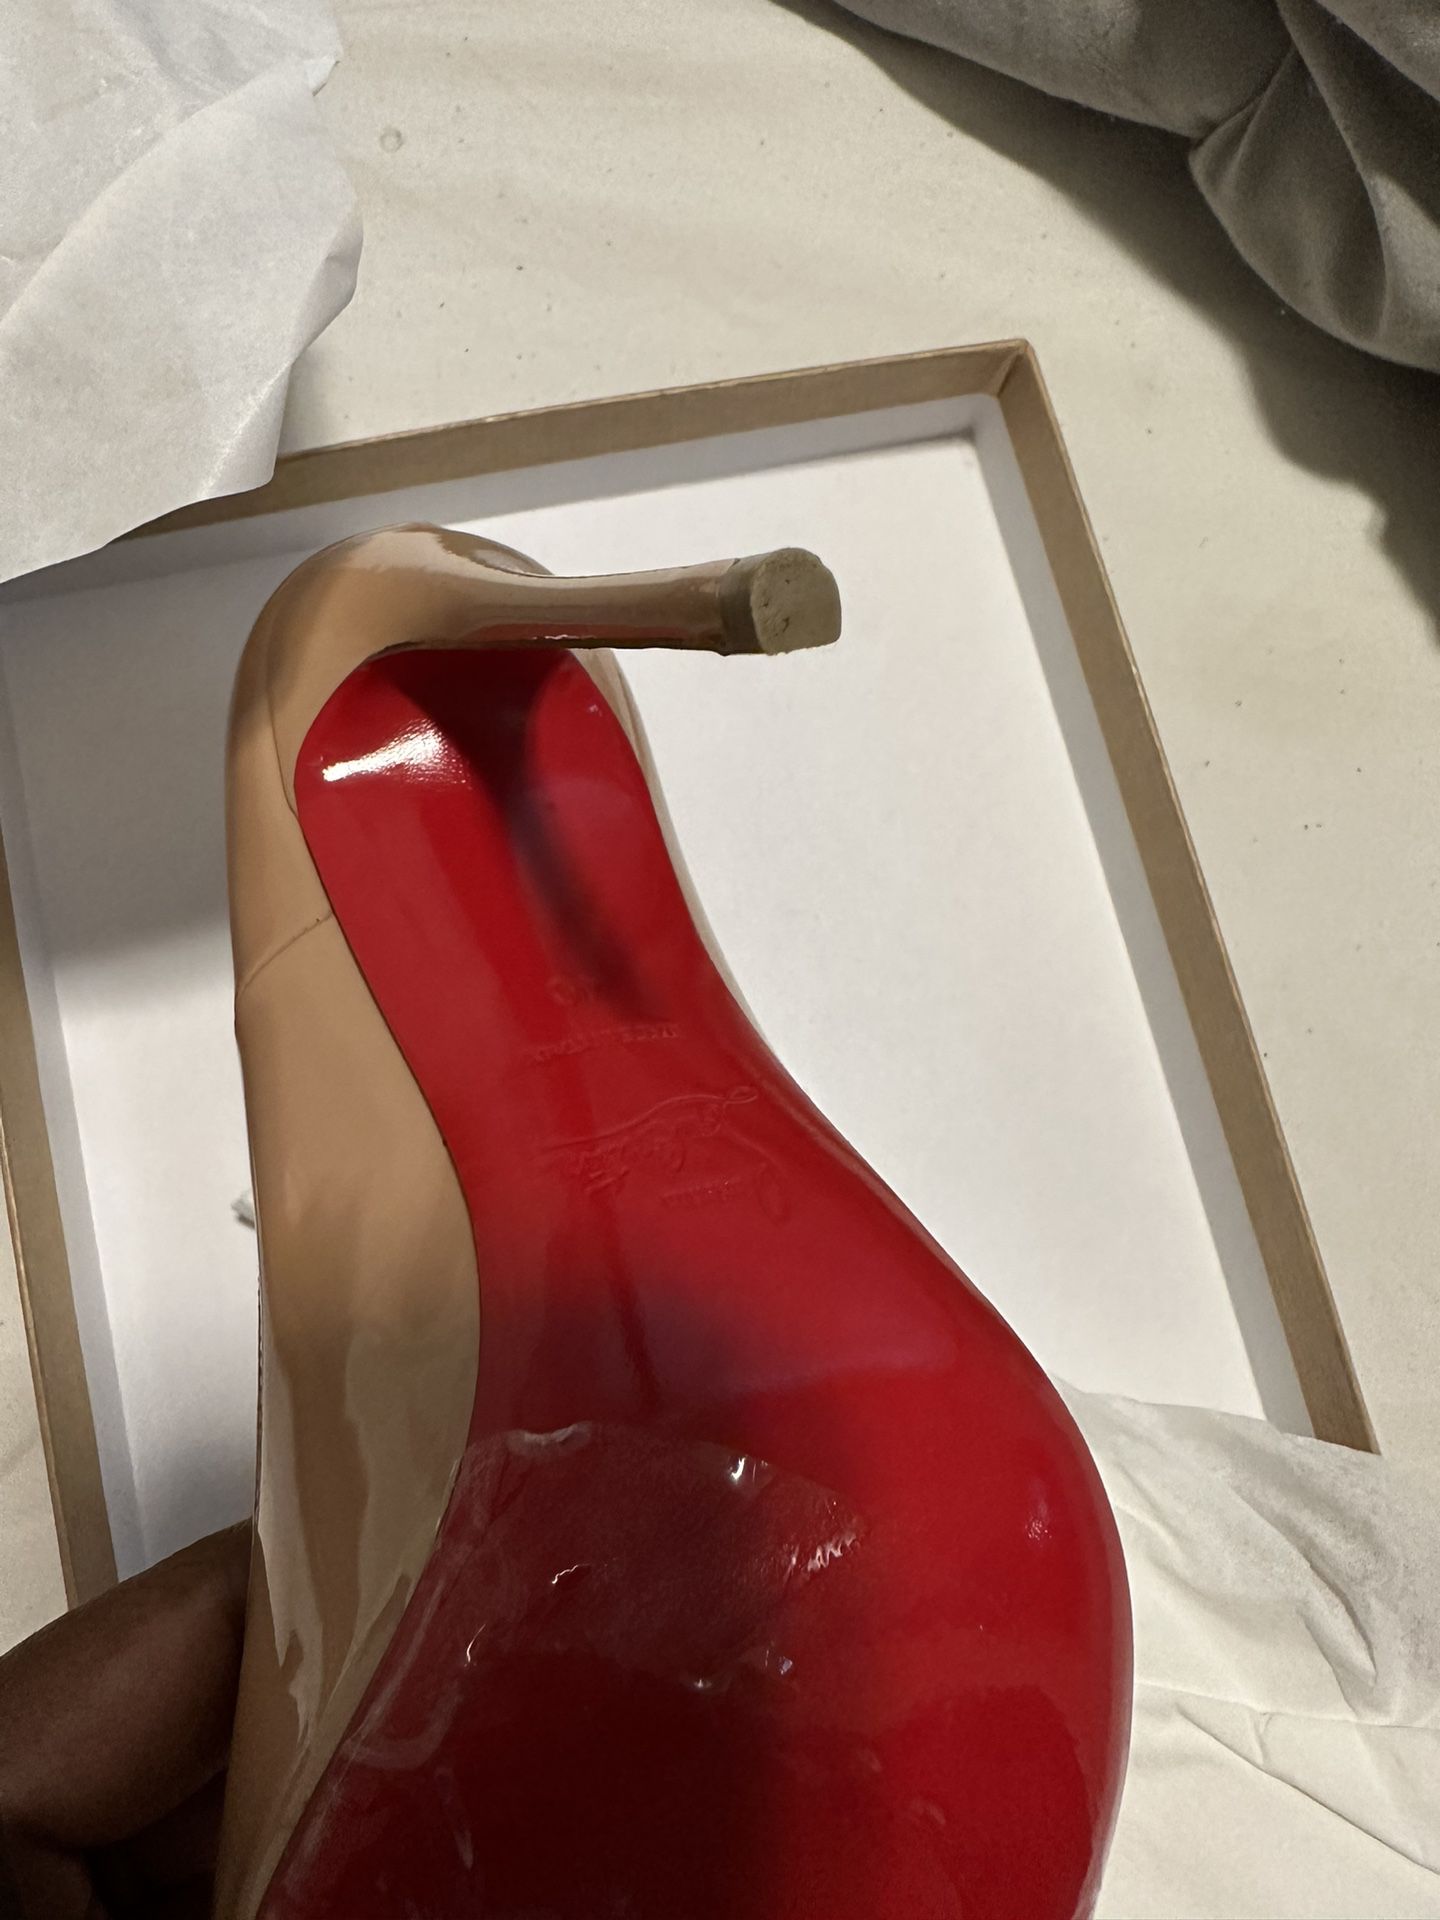 Louis Vuitton shoe red bottoms for Sale in Augusta, GA - OfferUp